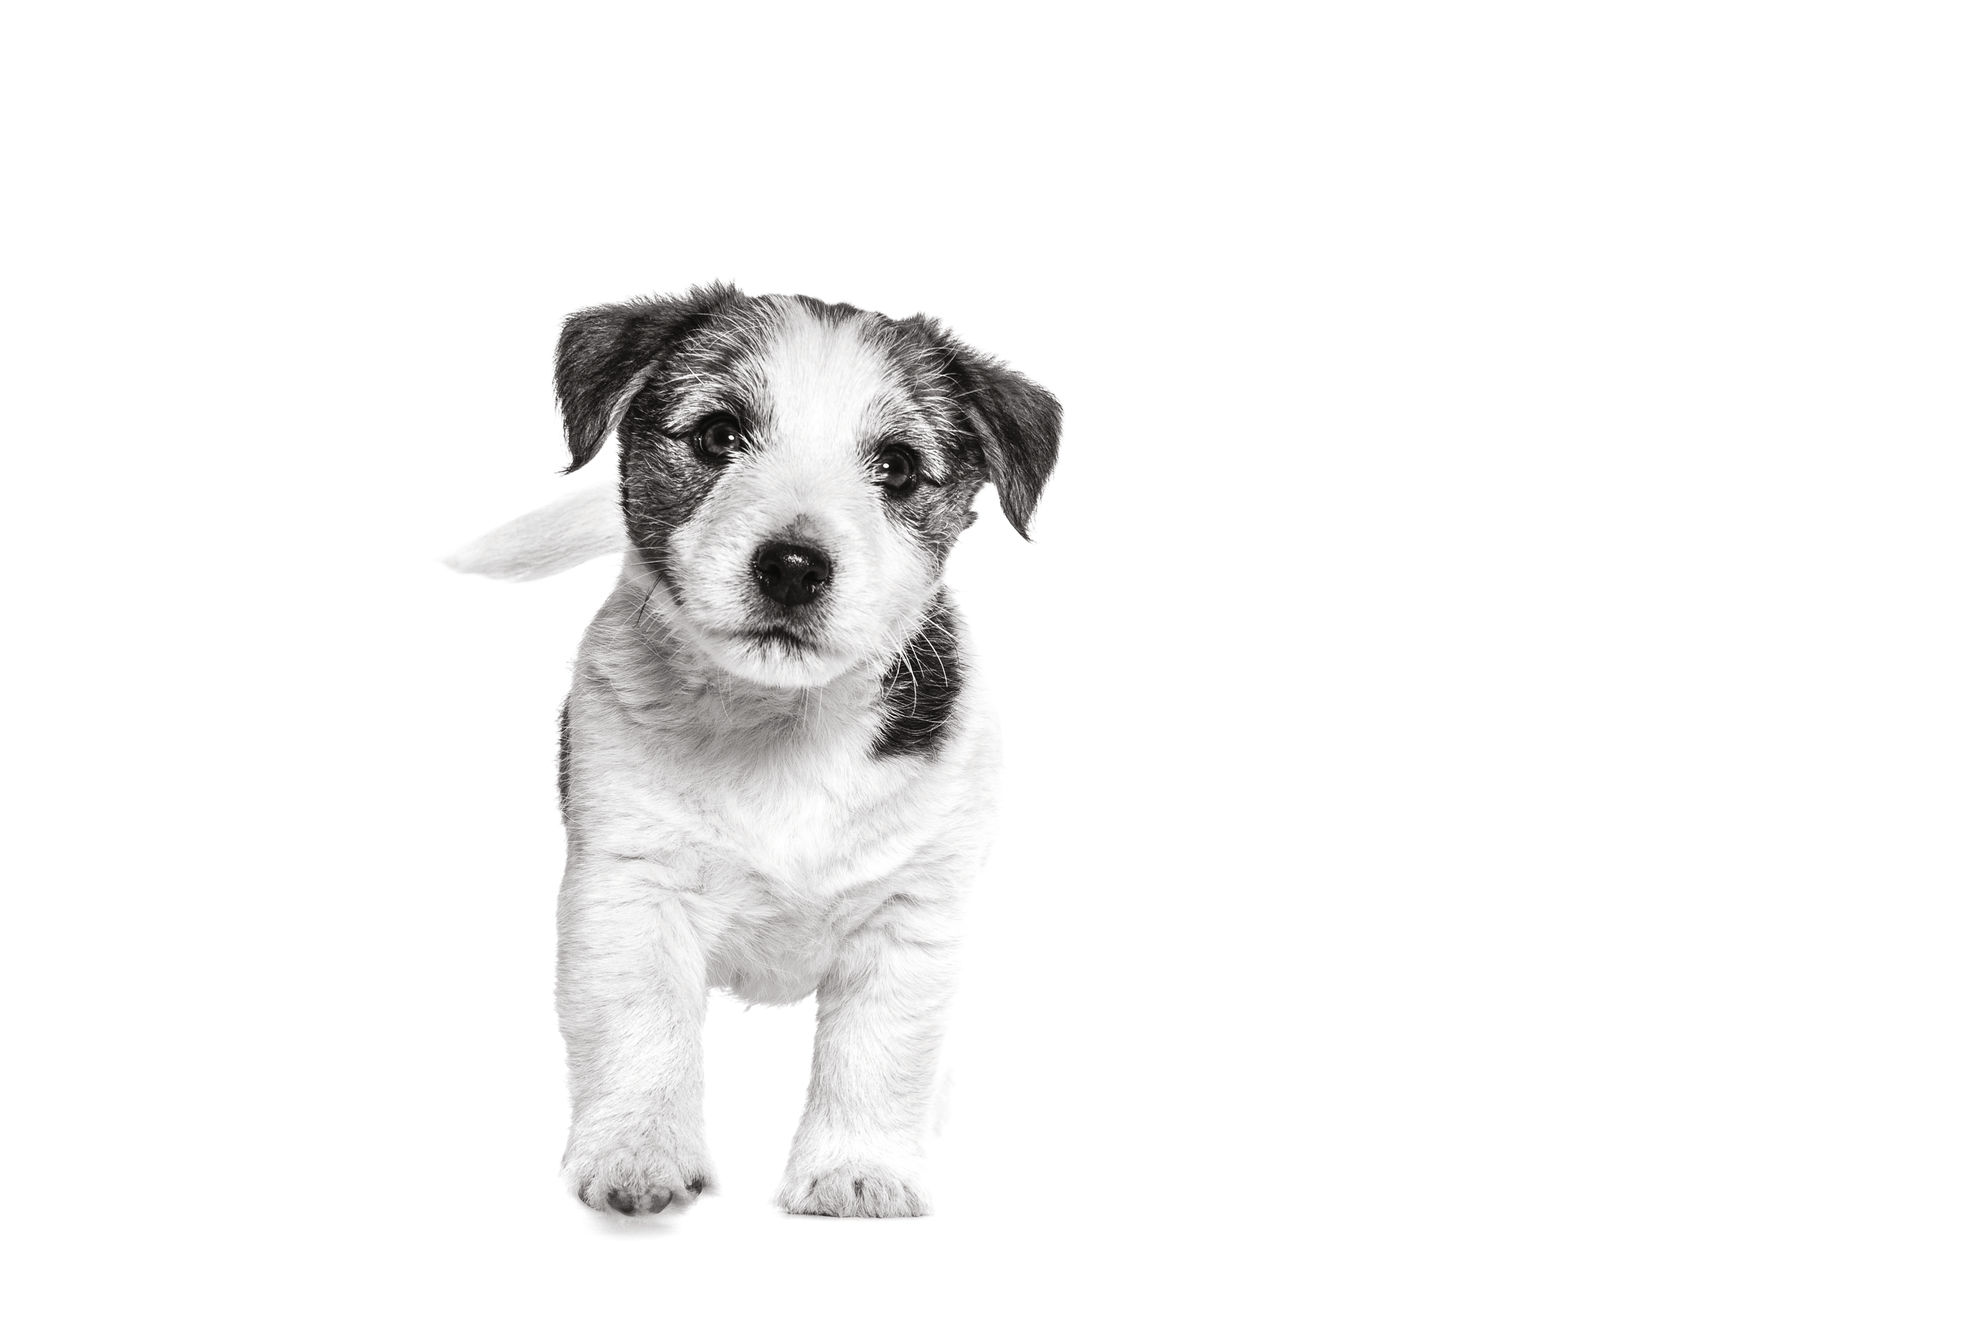 Jack Russell Terrier puppy standing in black and white on a white background